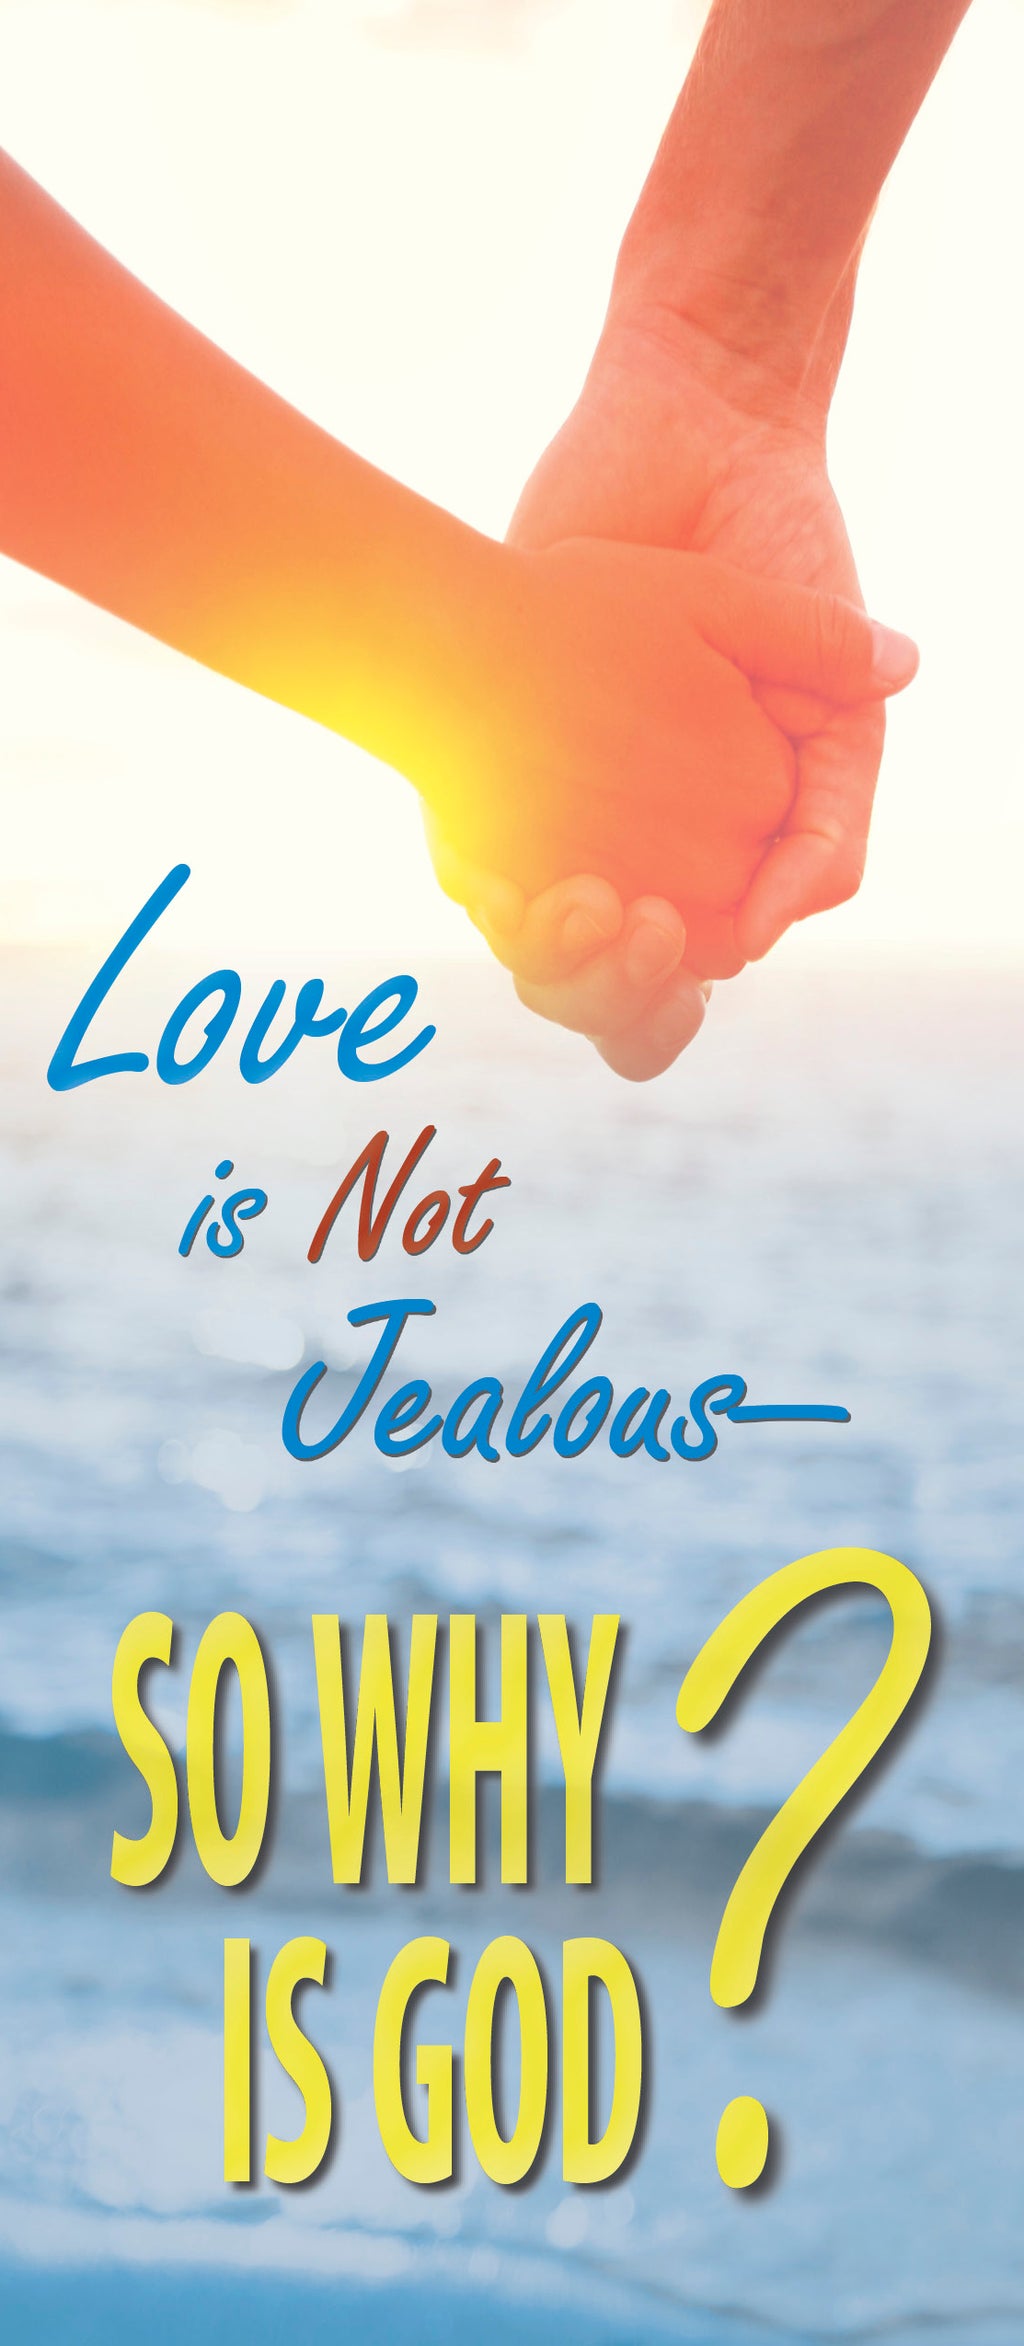 Love is not Jealous—So Why is God?